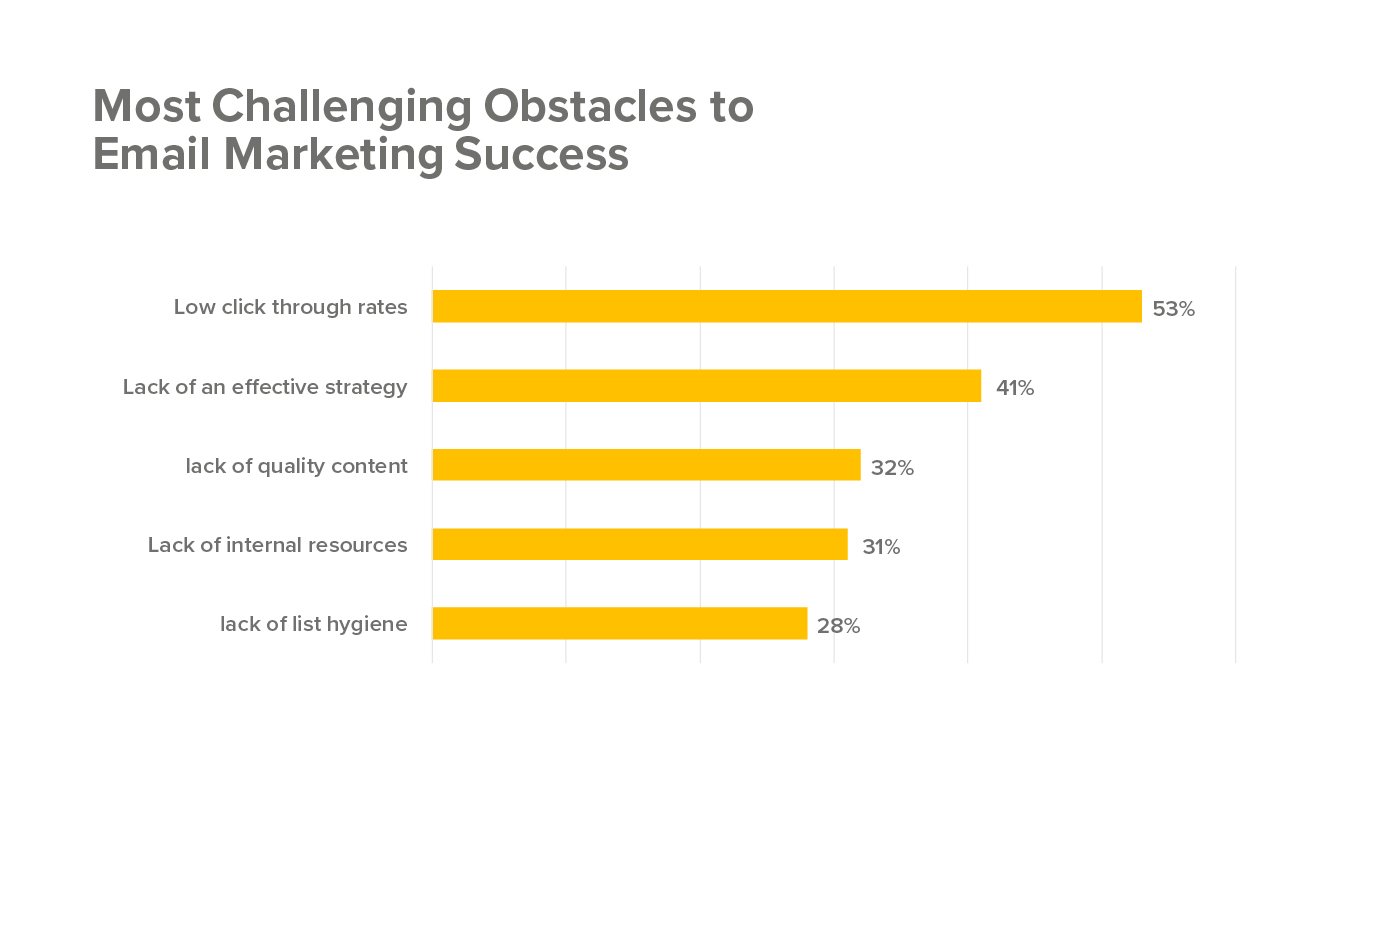 Most Challenging Obstacles to Email Marketing Success